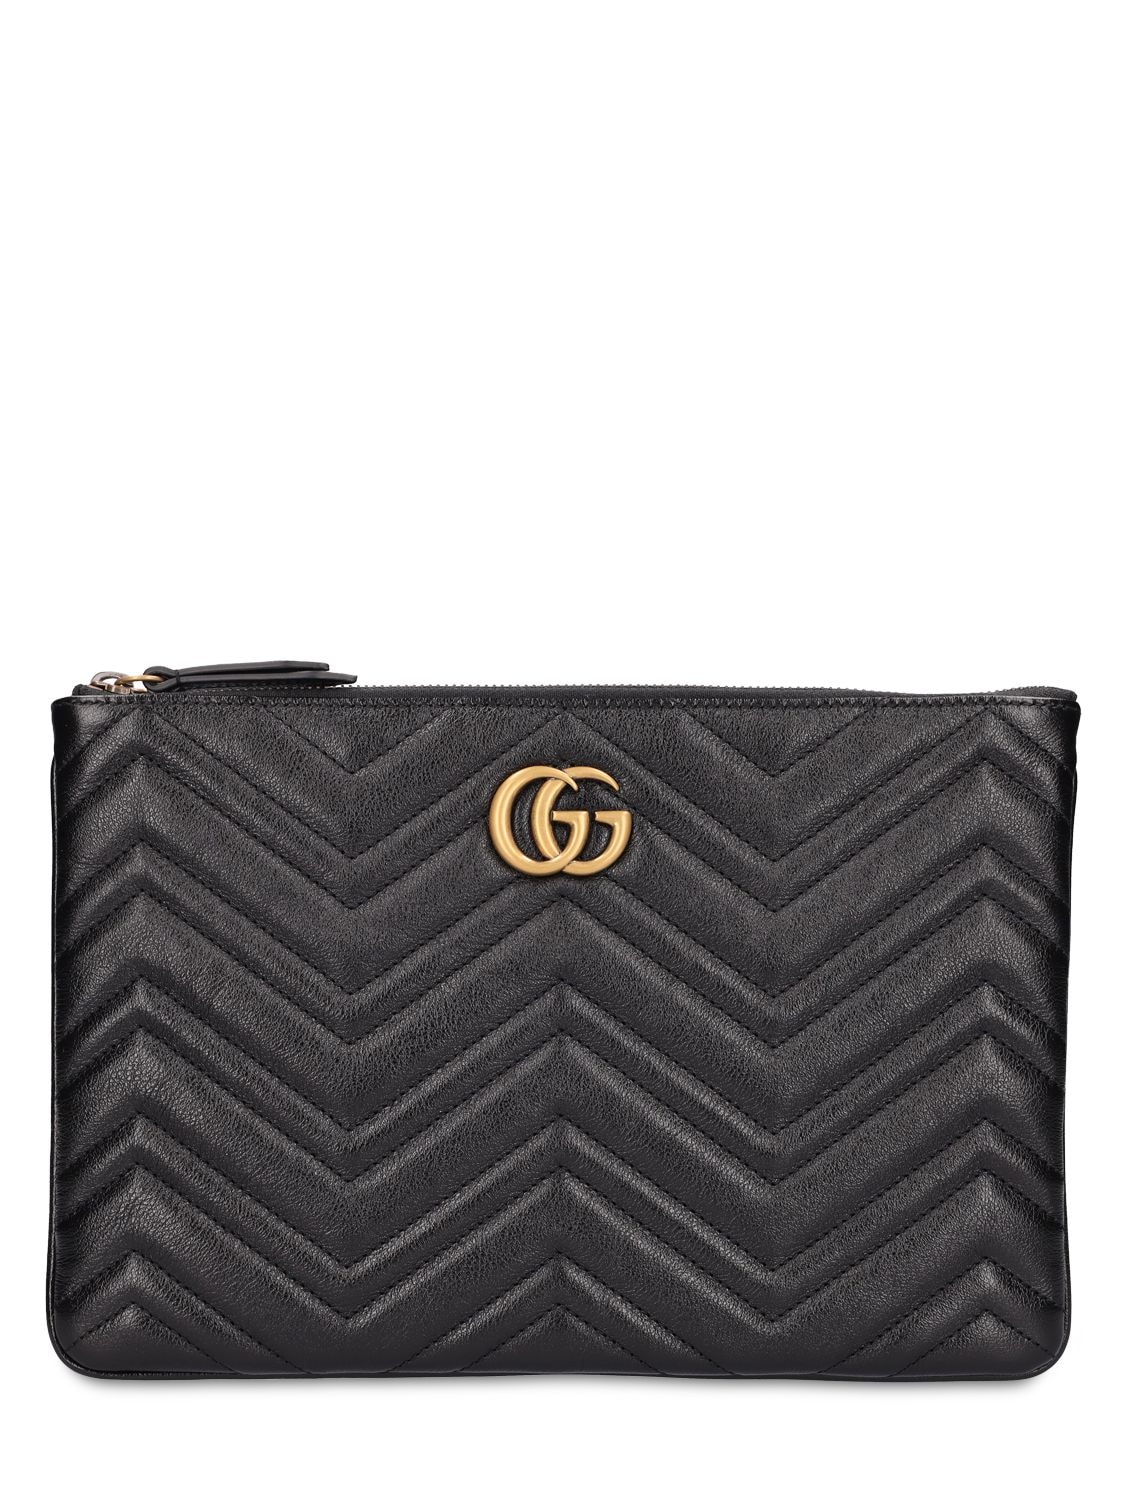 Gg Marmont 2.0 Leather Pouch